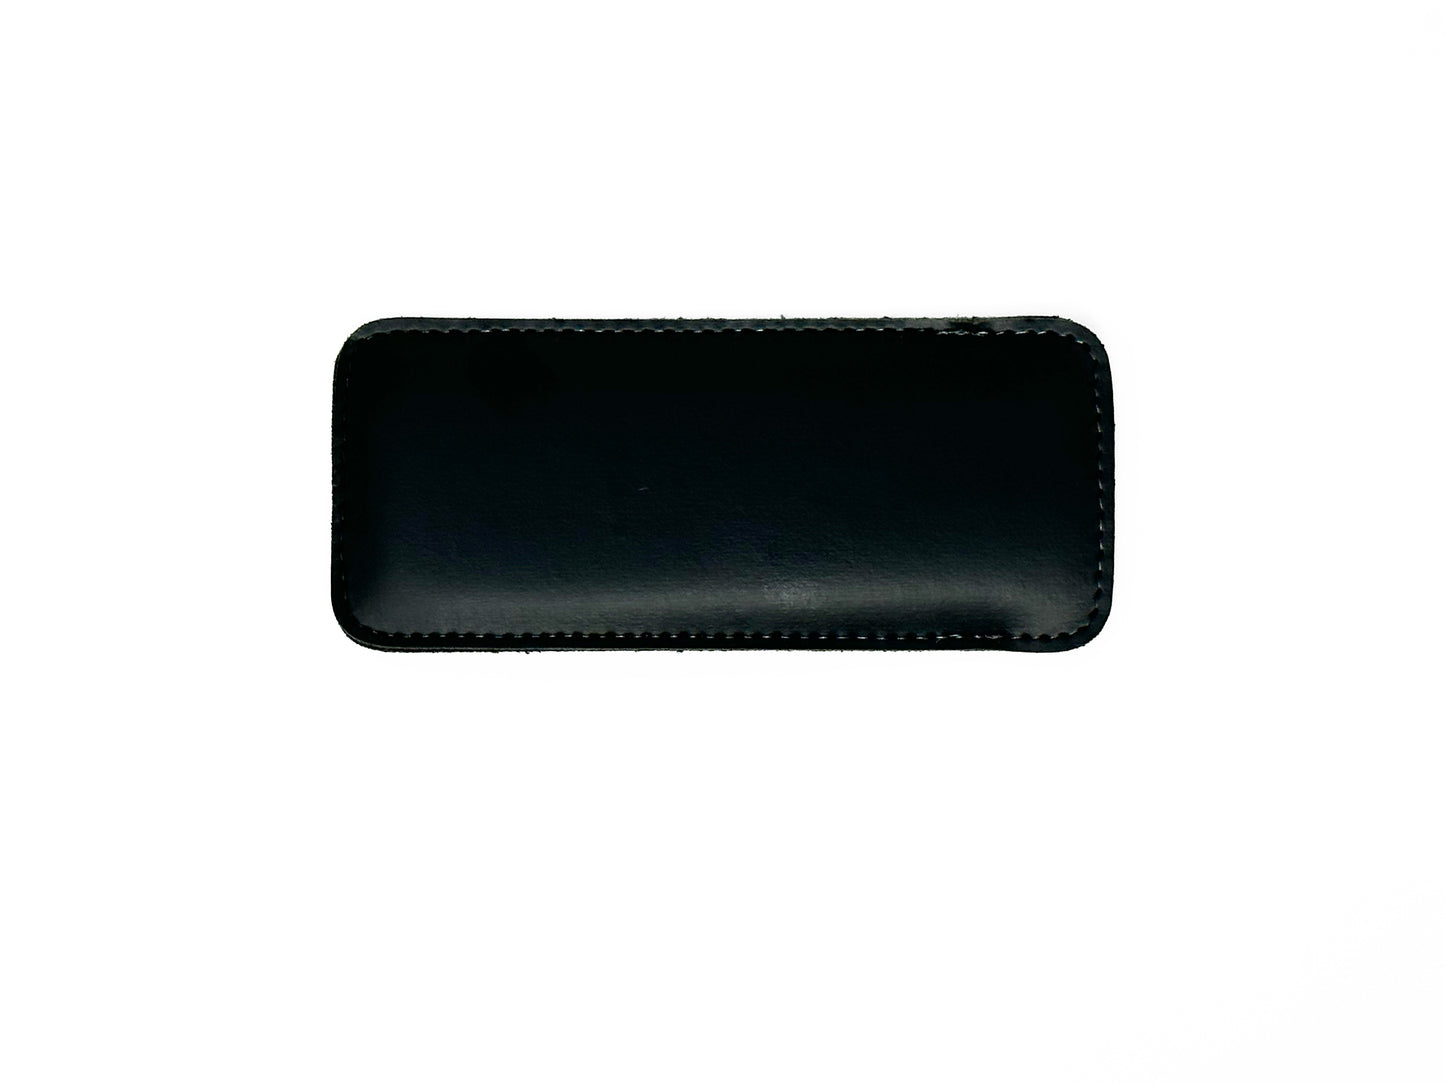 Thin, compact leather slip-in case in Black.